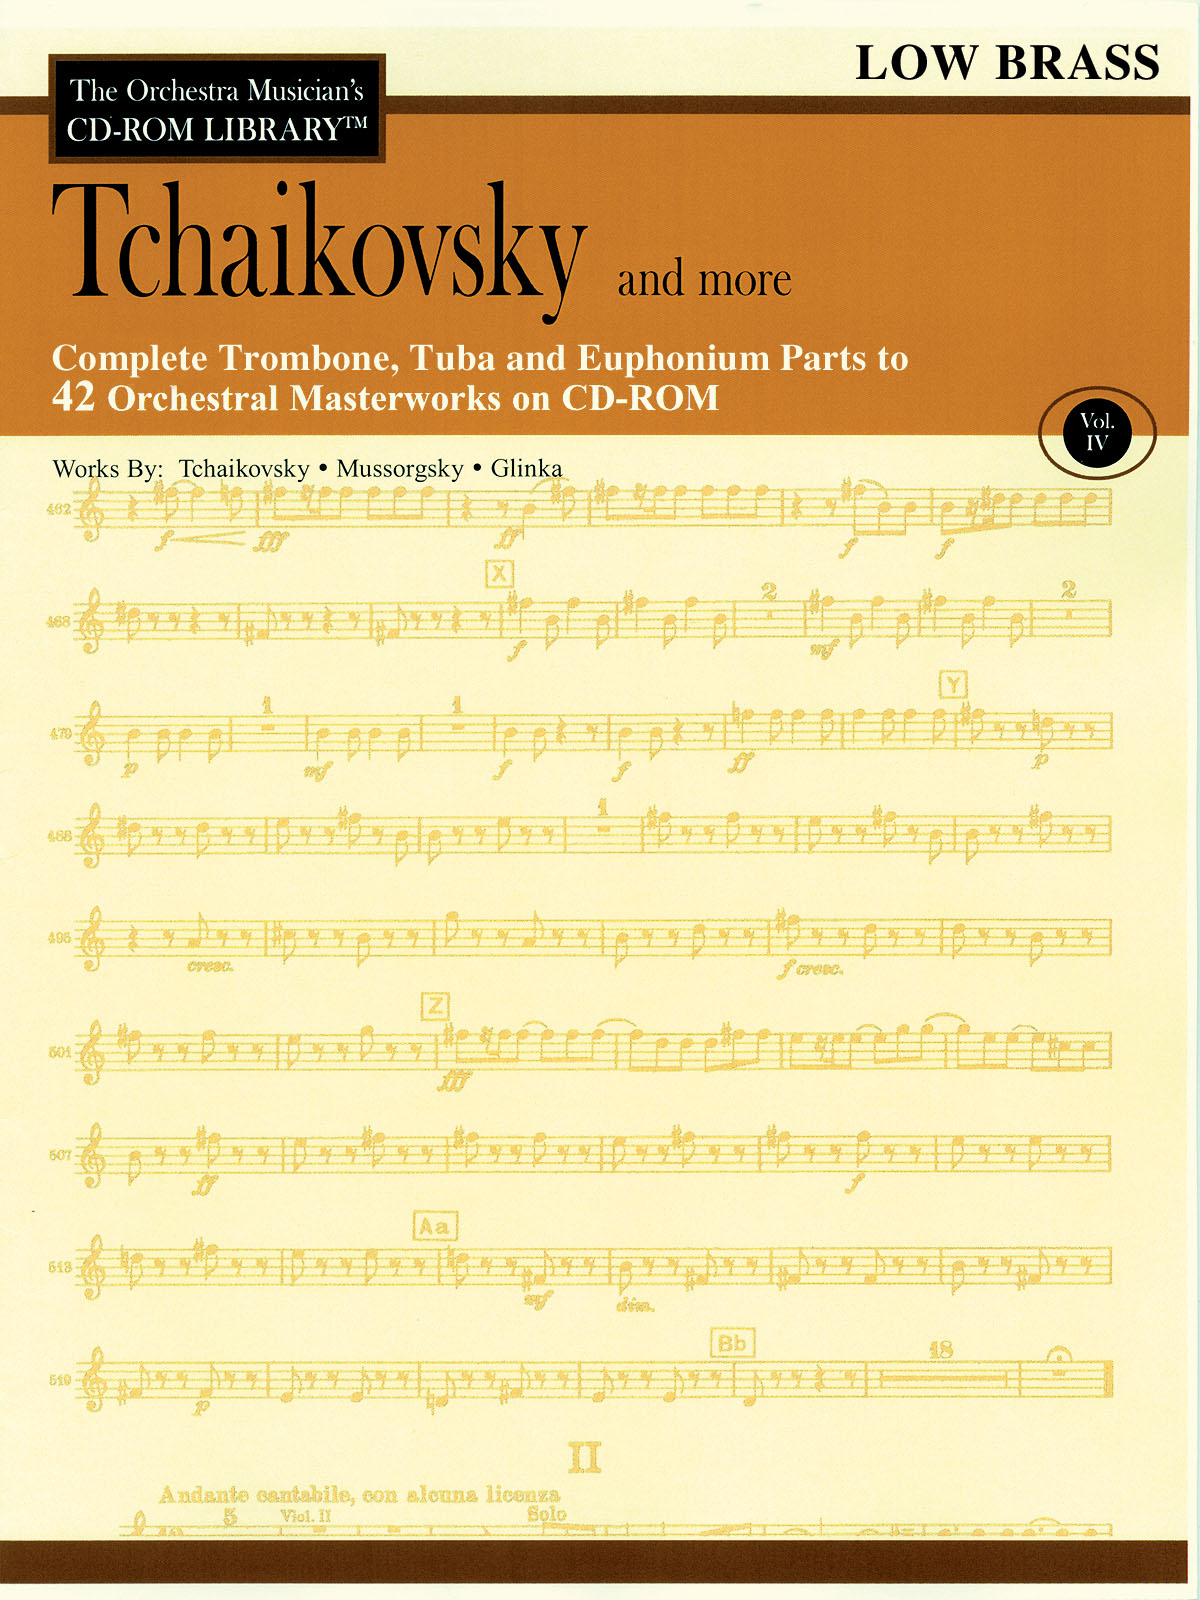 Tchaikovsky and More - Volume 4(The Orchestra Musician's CD-ROM Library - Low Brass)